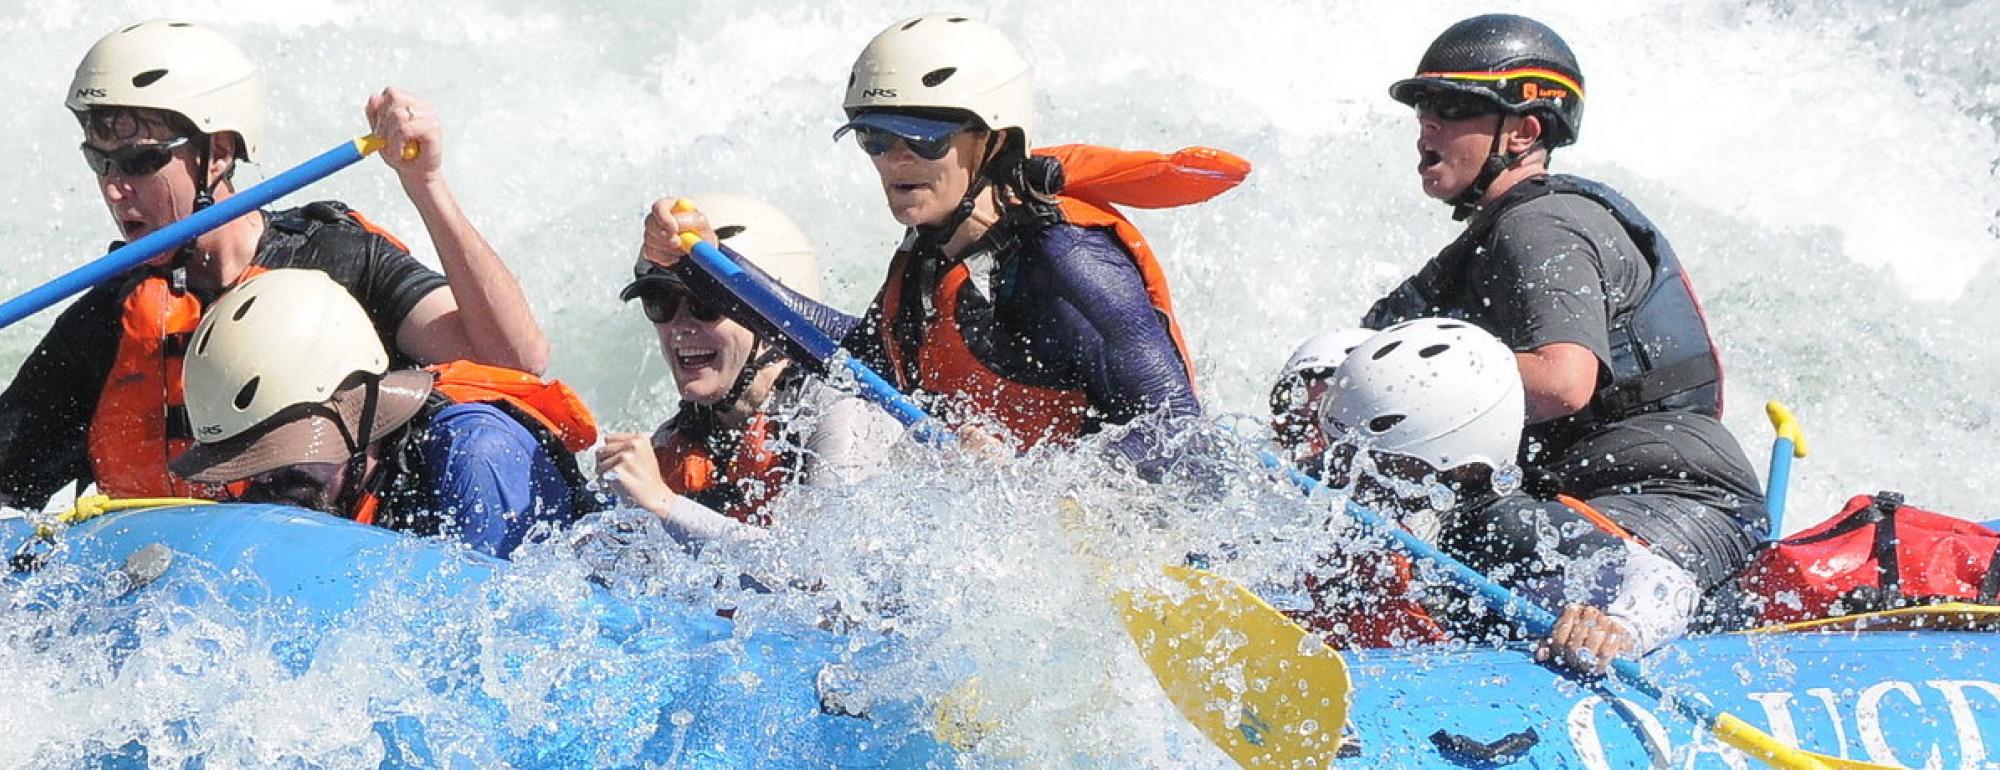 Group whitewater rafting on the American river